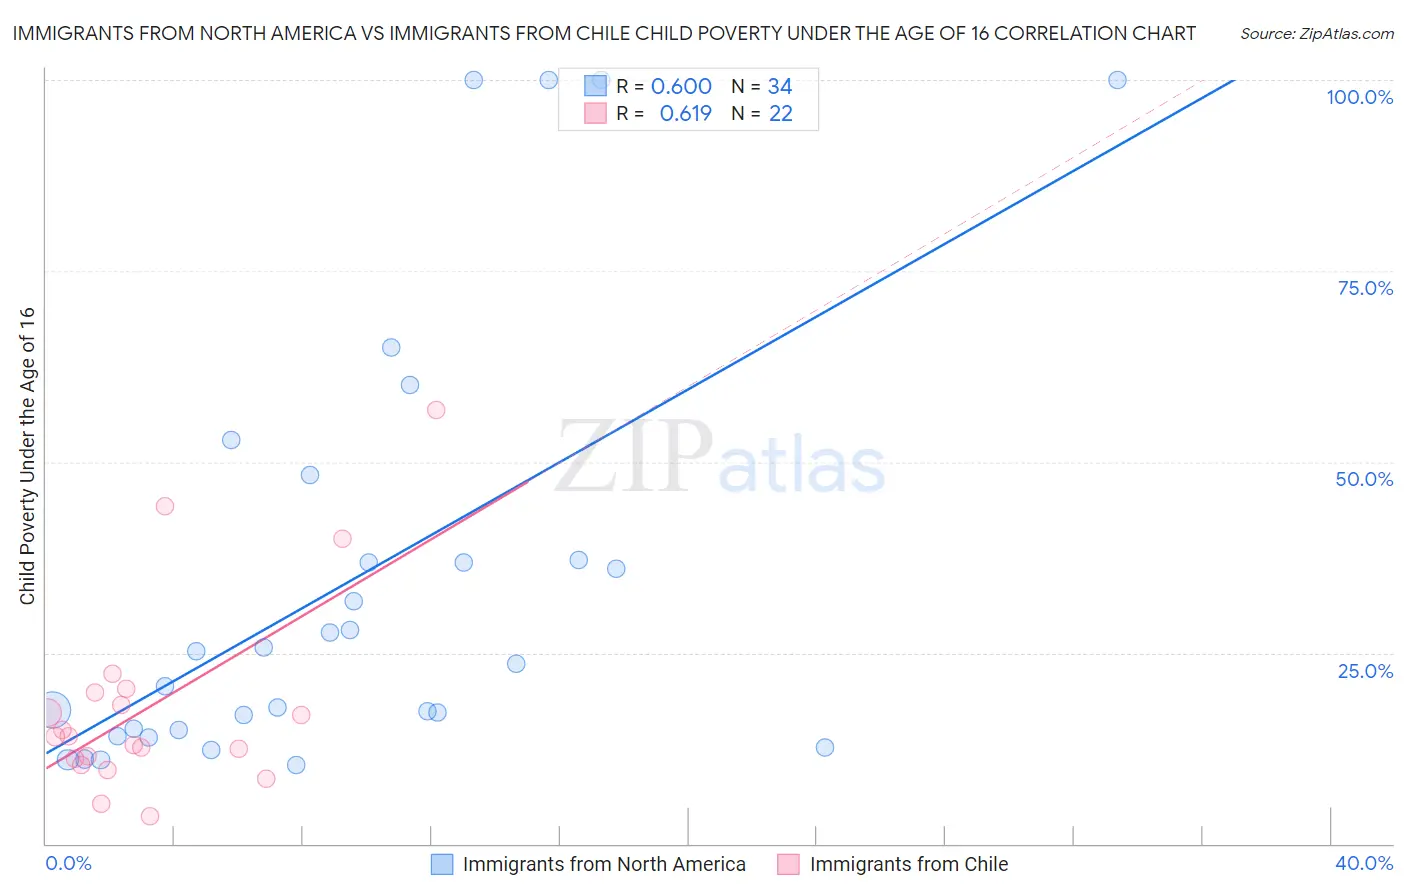 Immigrants from North America vs Immigrants from Chile Child Poverty Under the Age of 16